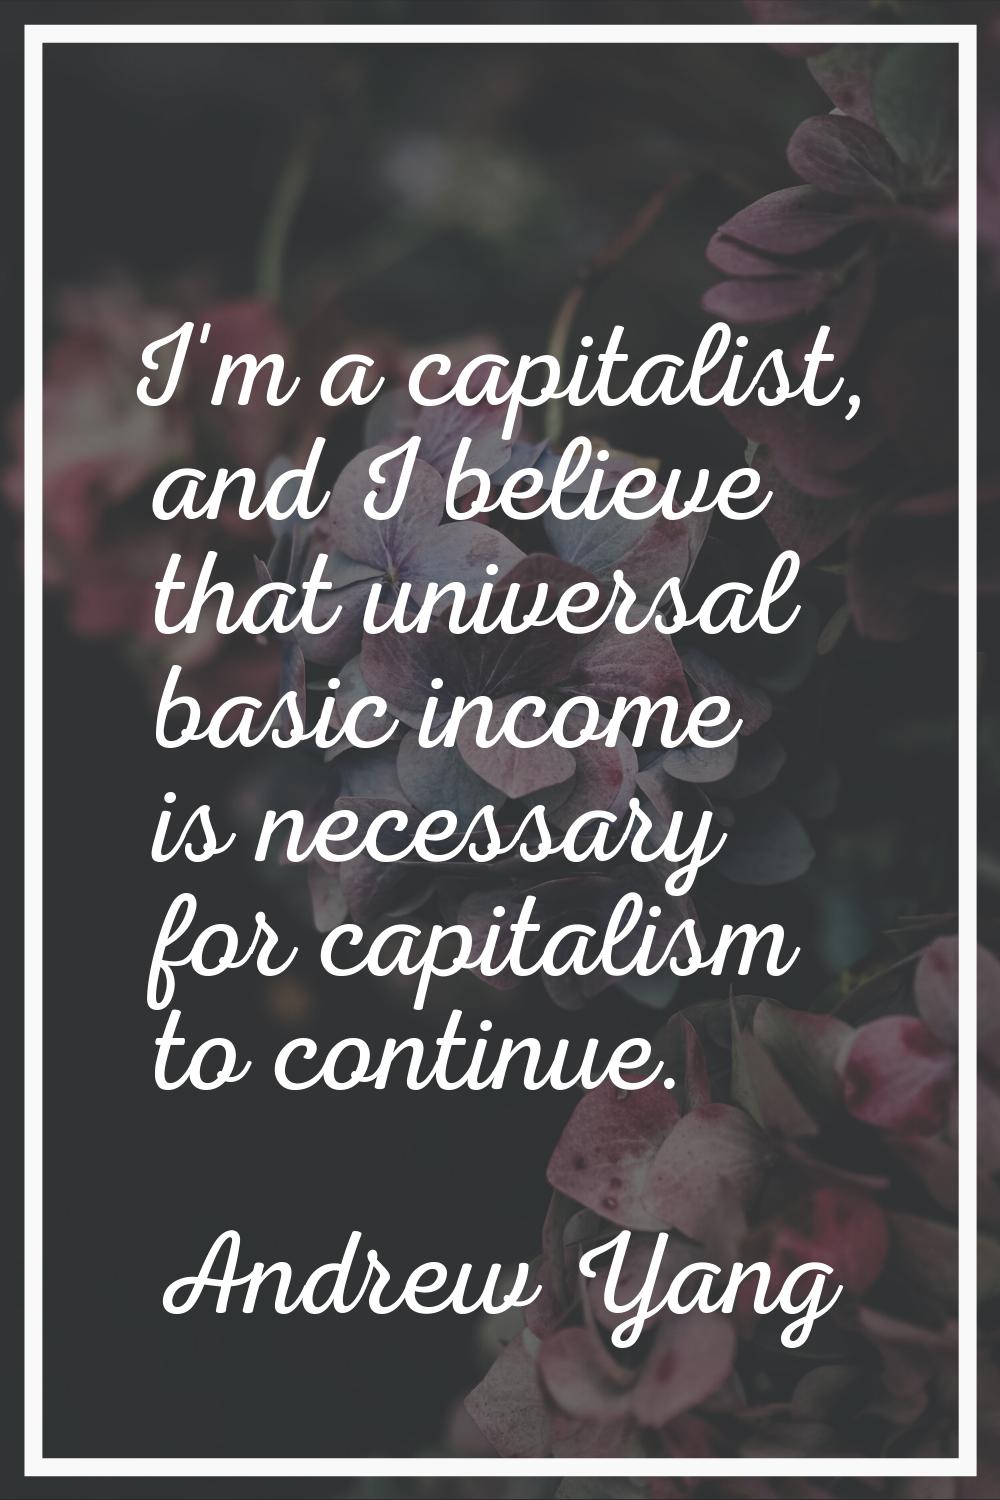 I'm a capitalist, and I believe that universal basic income is necessary for capitalism to continue